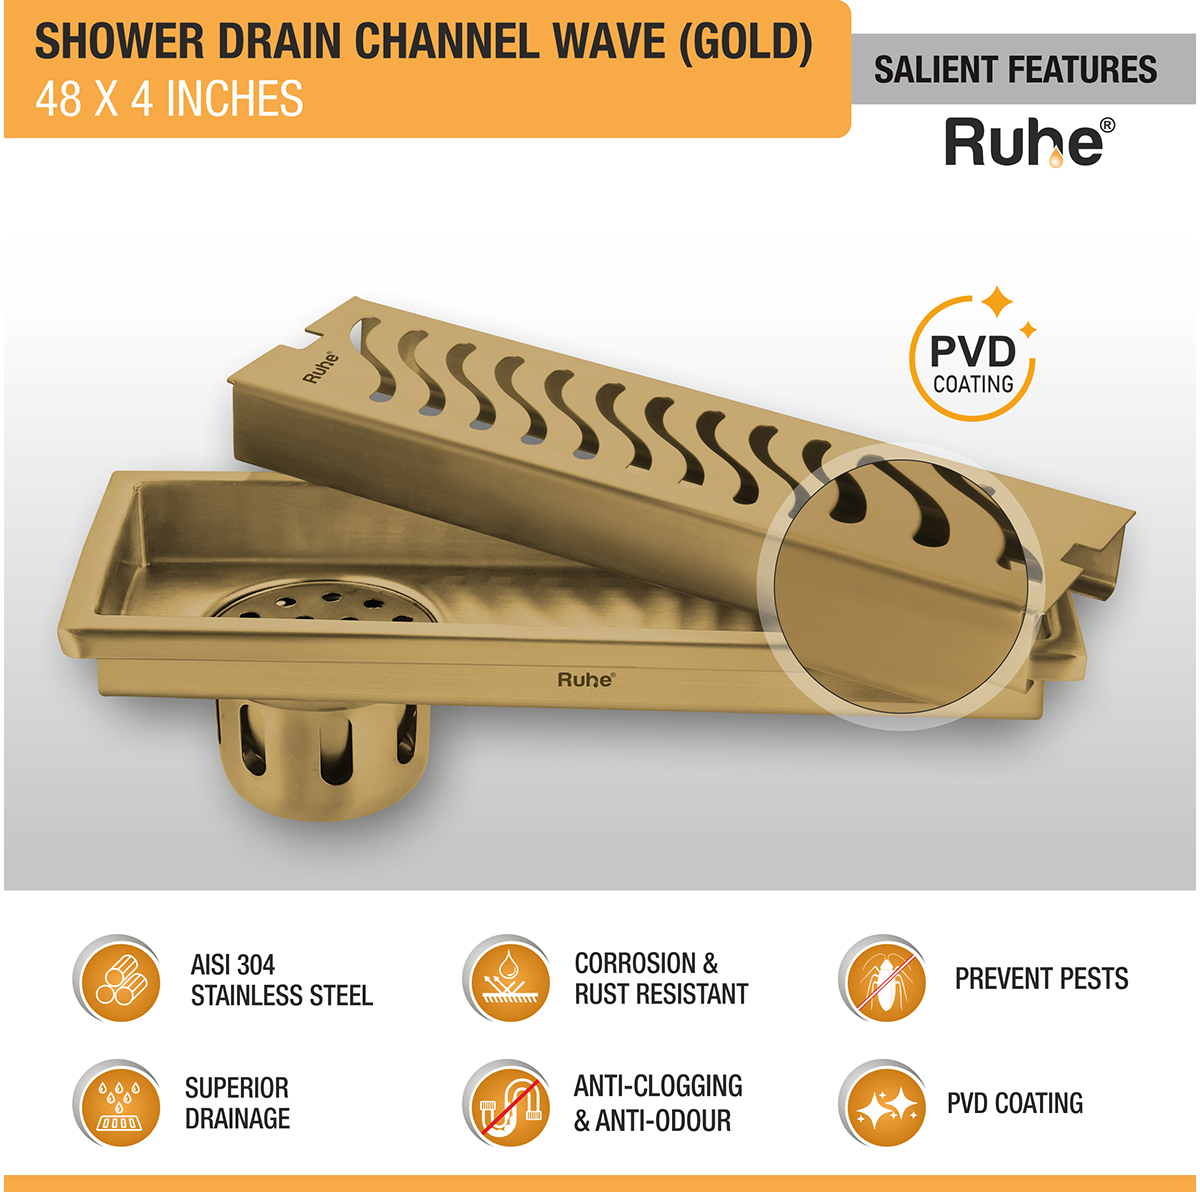 Wave Shower Drain Channel (48 x 4 Inches) YELLOW GOLD features